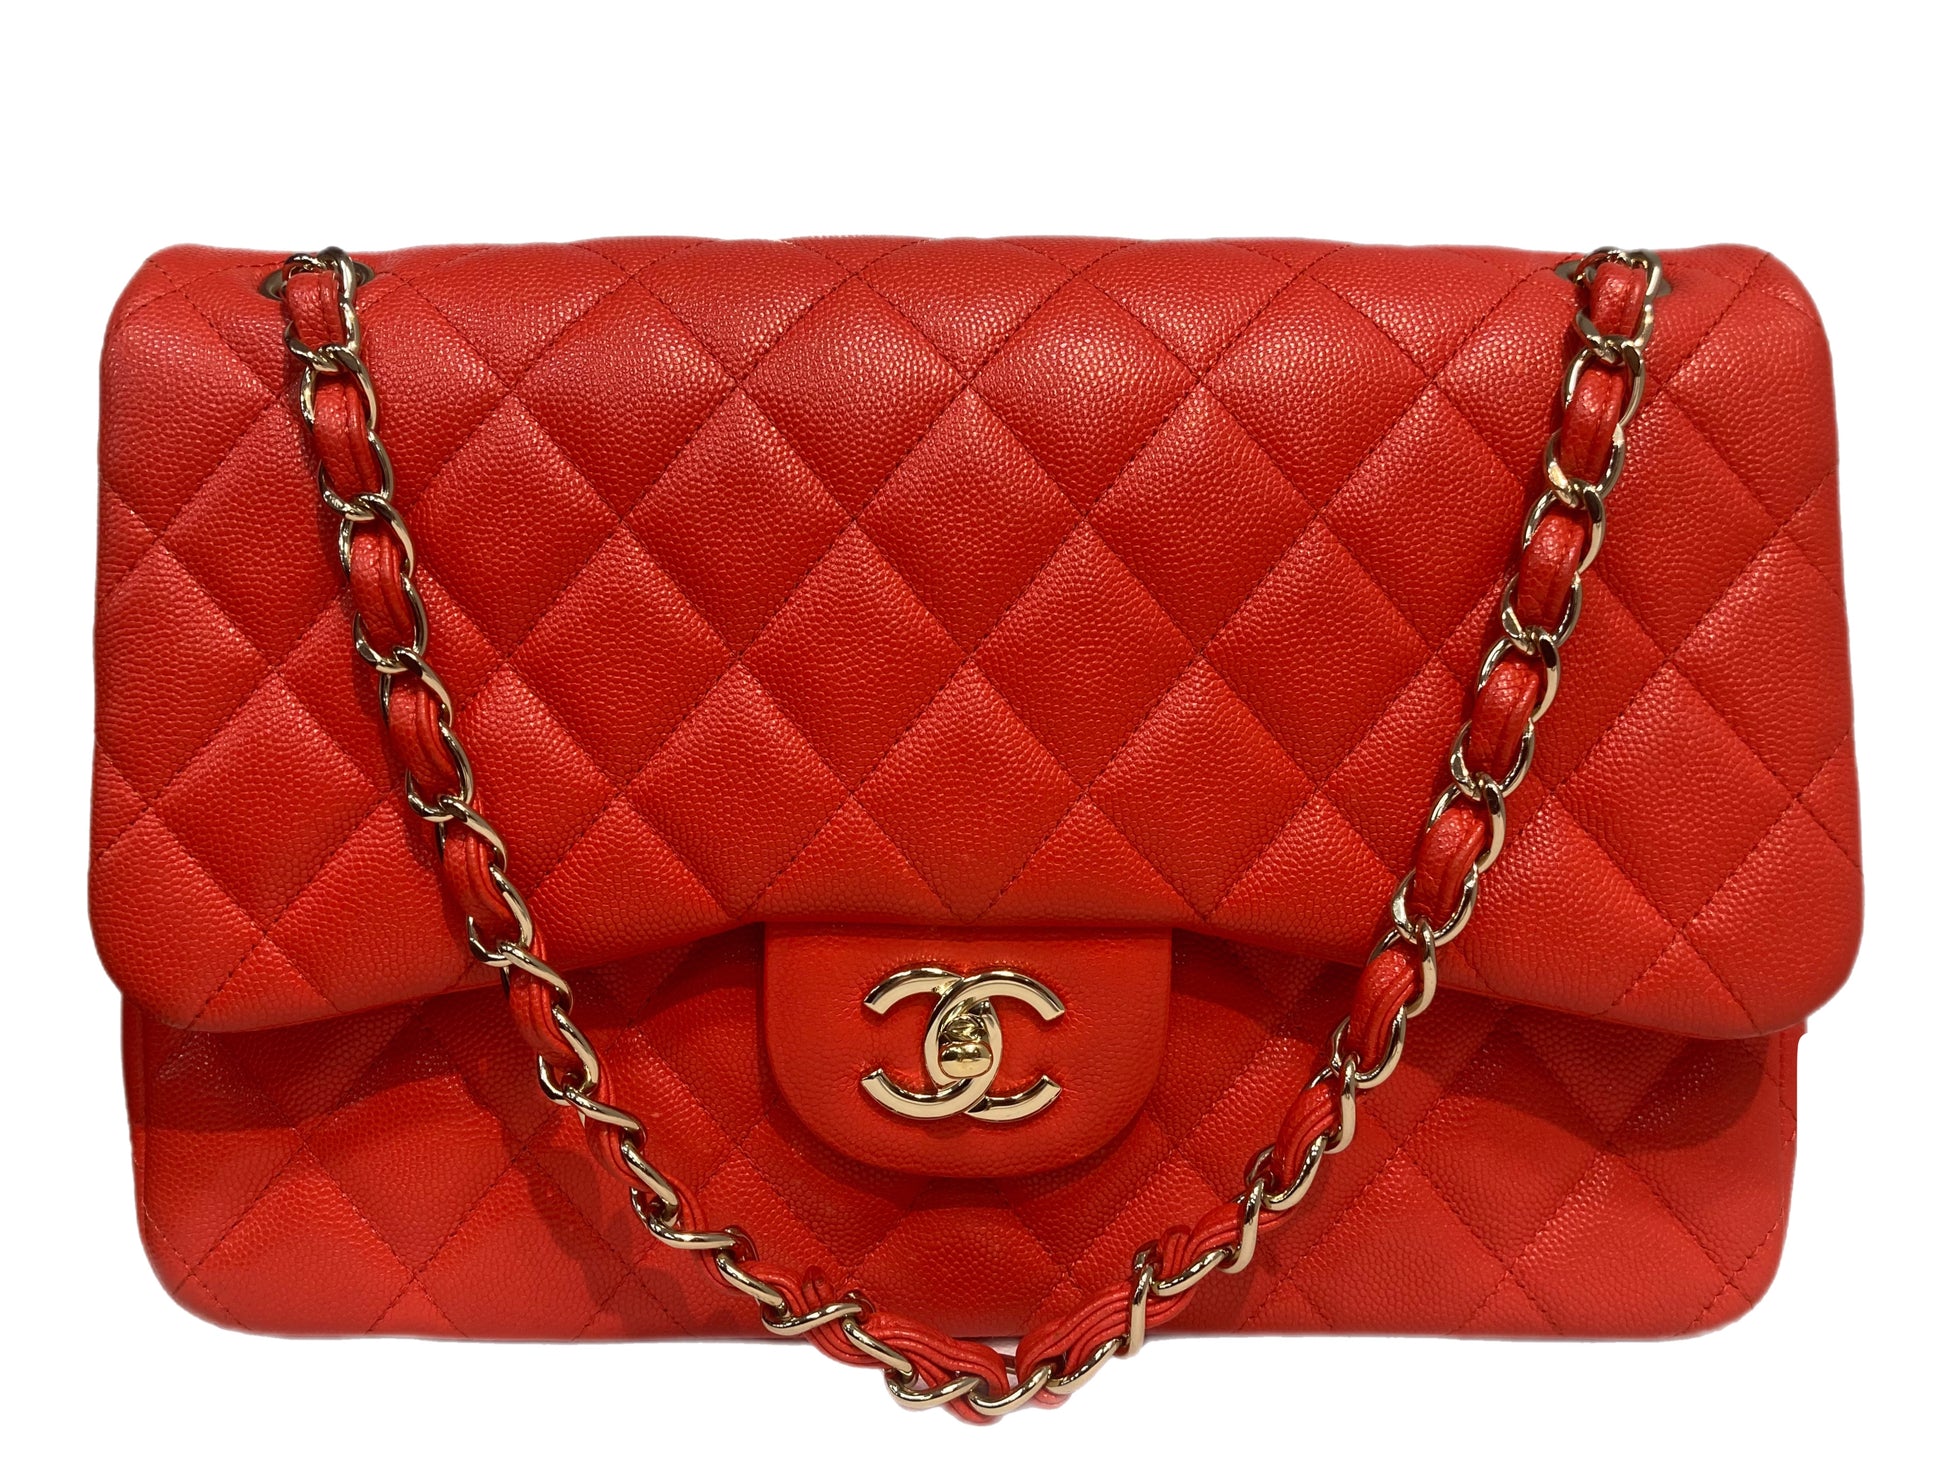 Chanel Classic Quilted Lambskin Jumbo Double Flap Bag in Peach